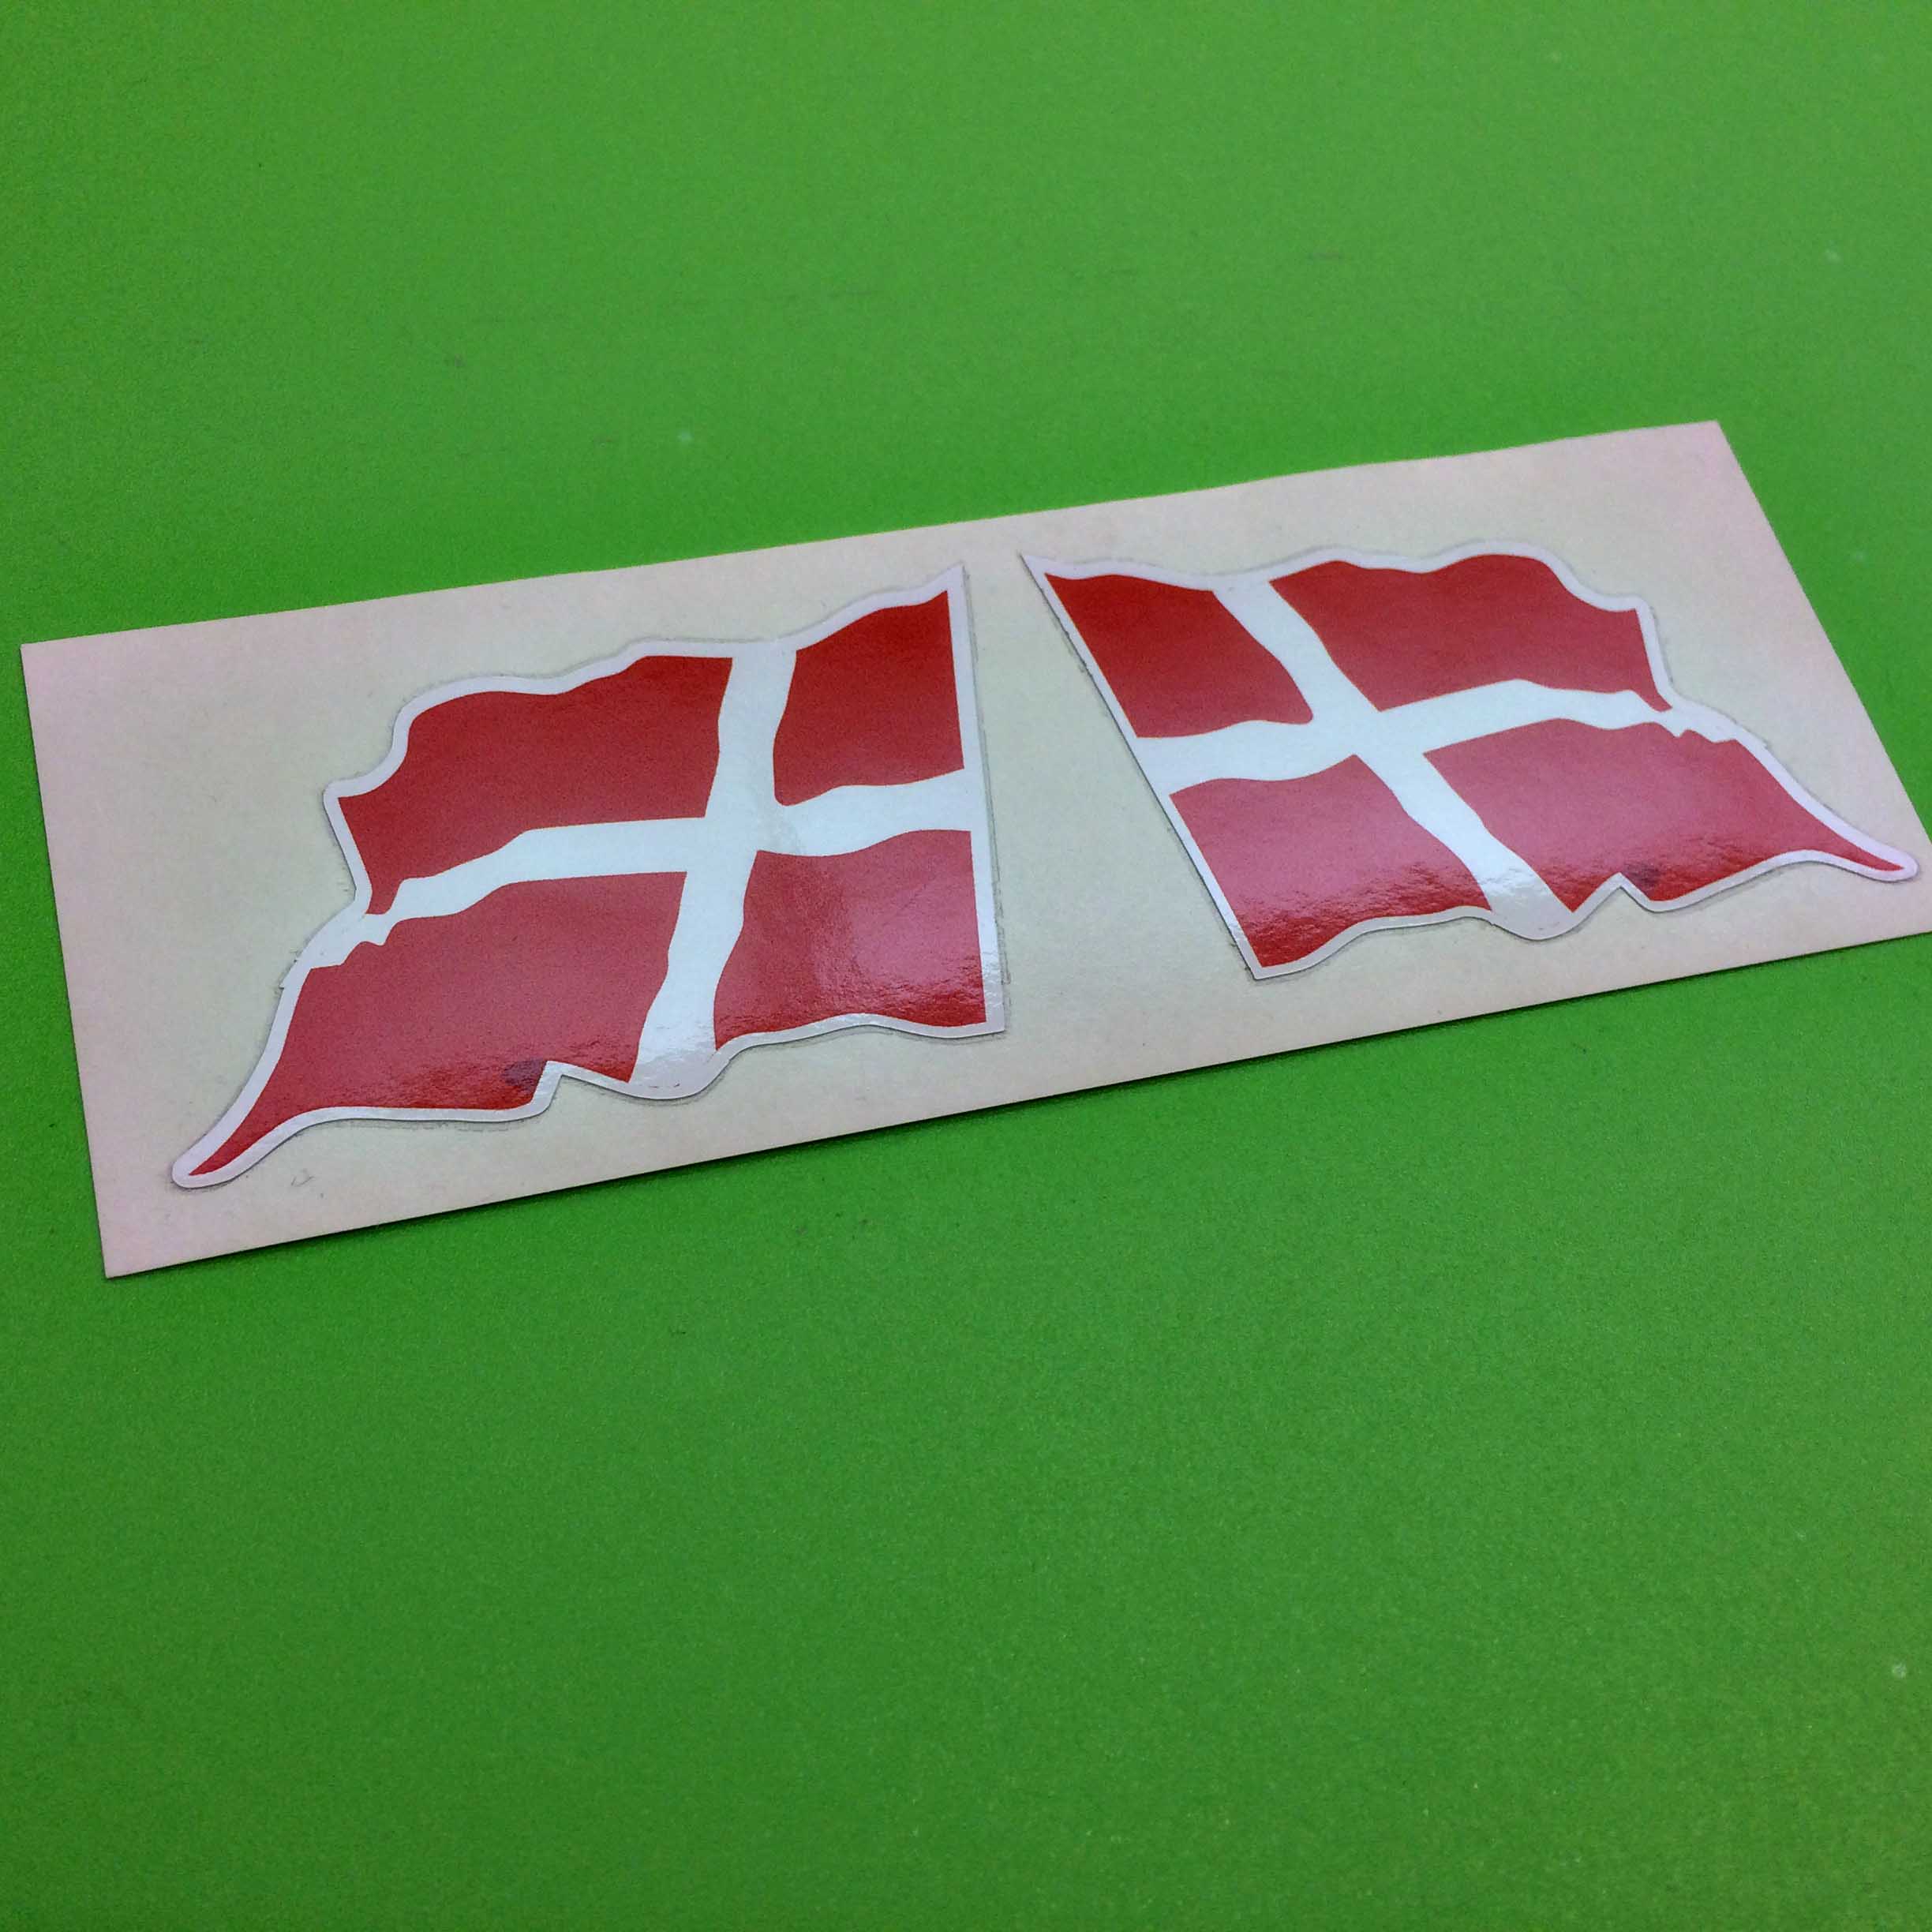 DENMARK FLAG WAVEY STICKERS. A wavy flag of Denmark. A white cross on a red background.